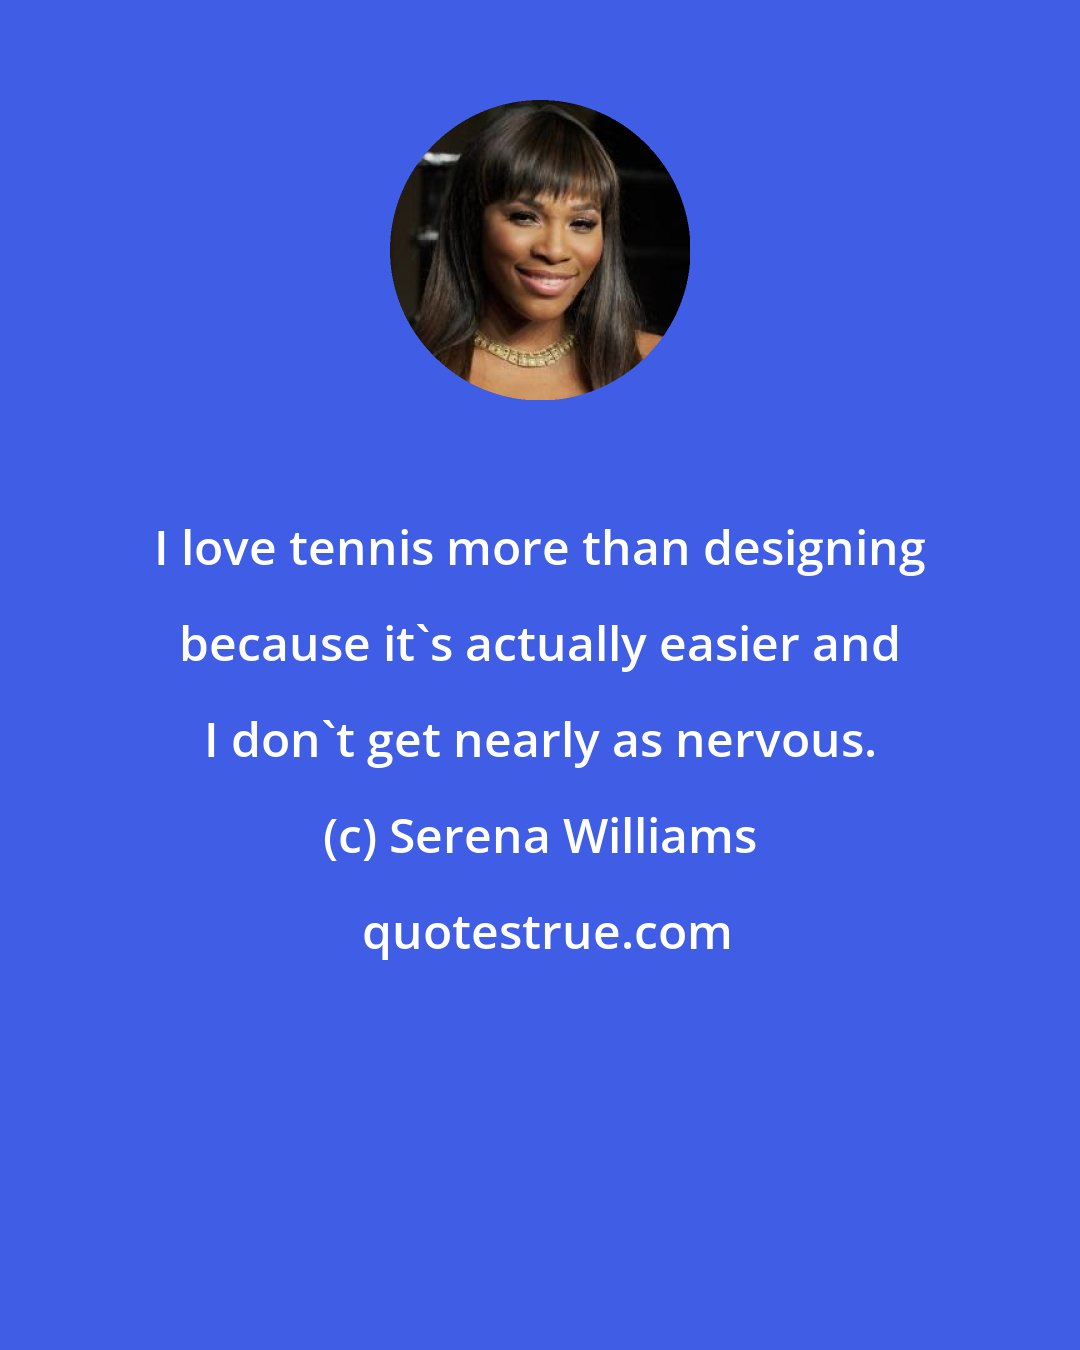 Serena Williams: I love tennis more than designing because it's actually easier and I don't get nearly as nervous.